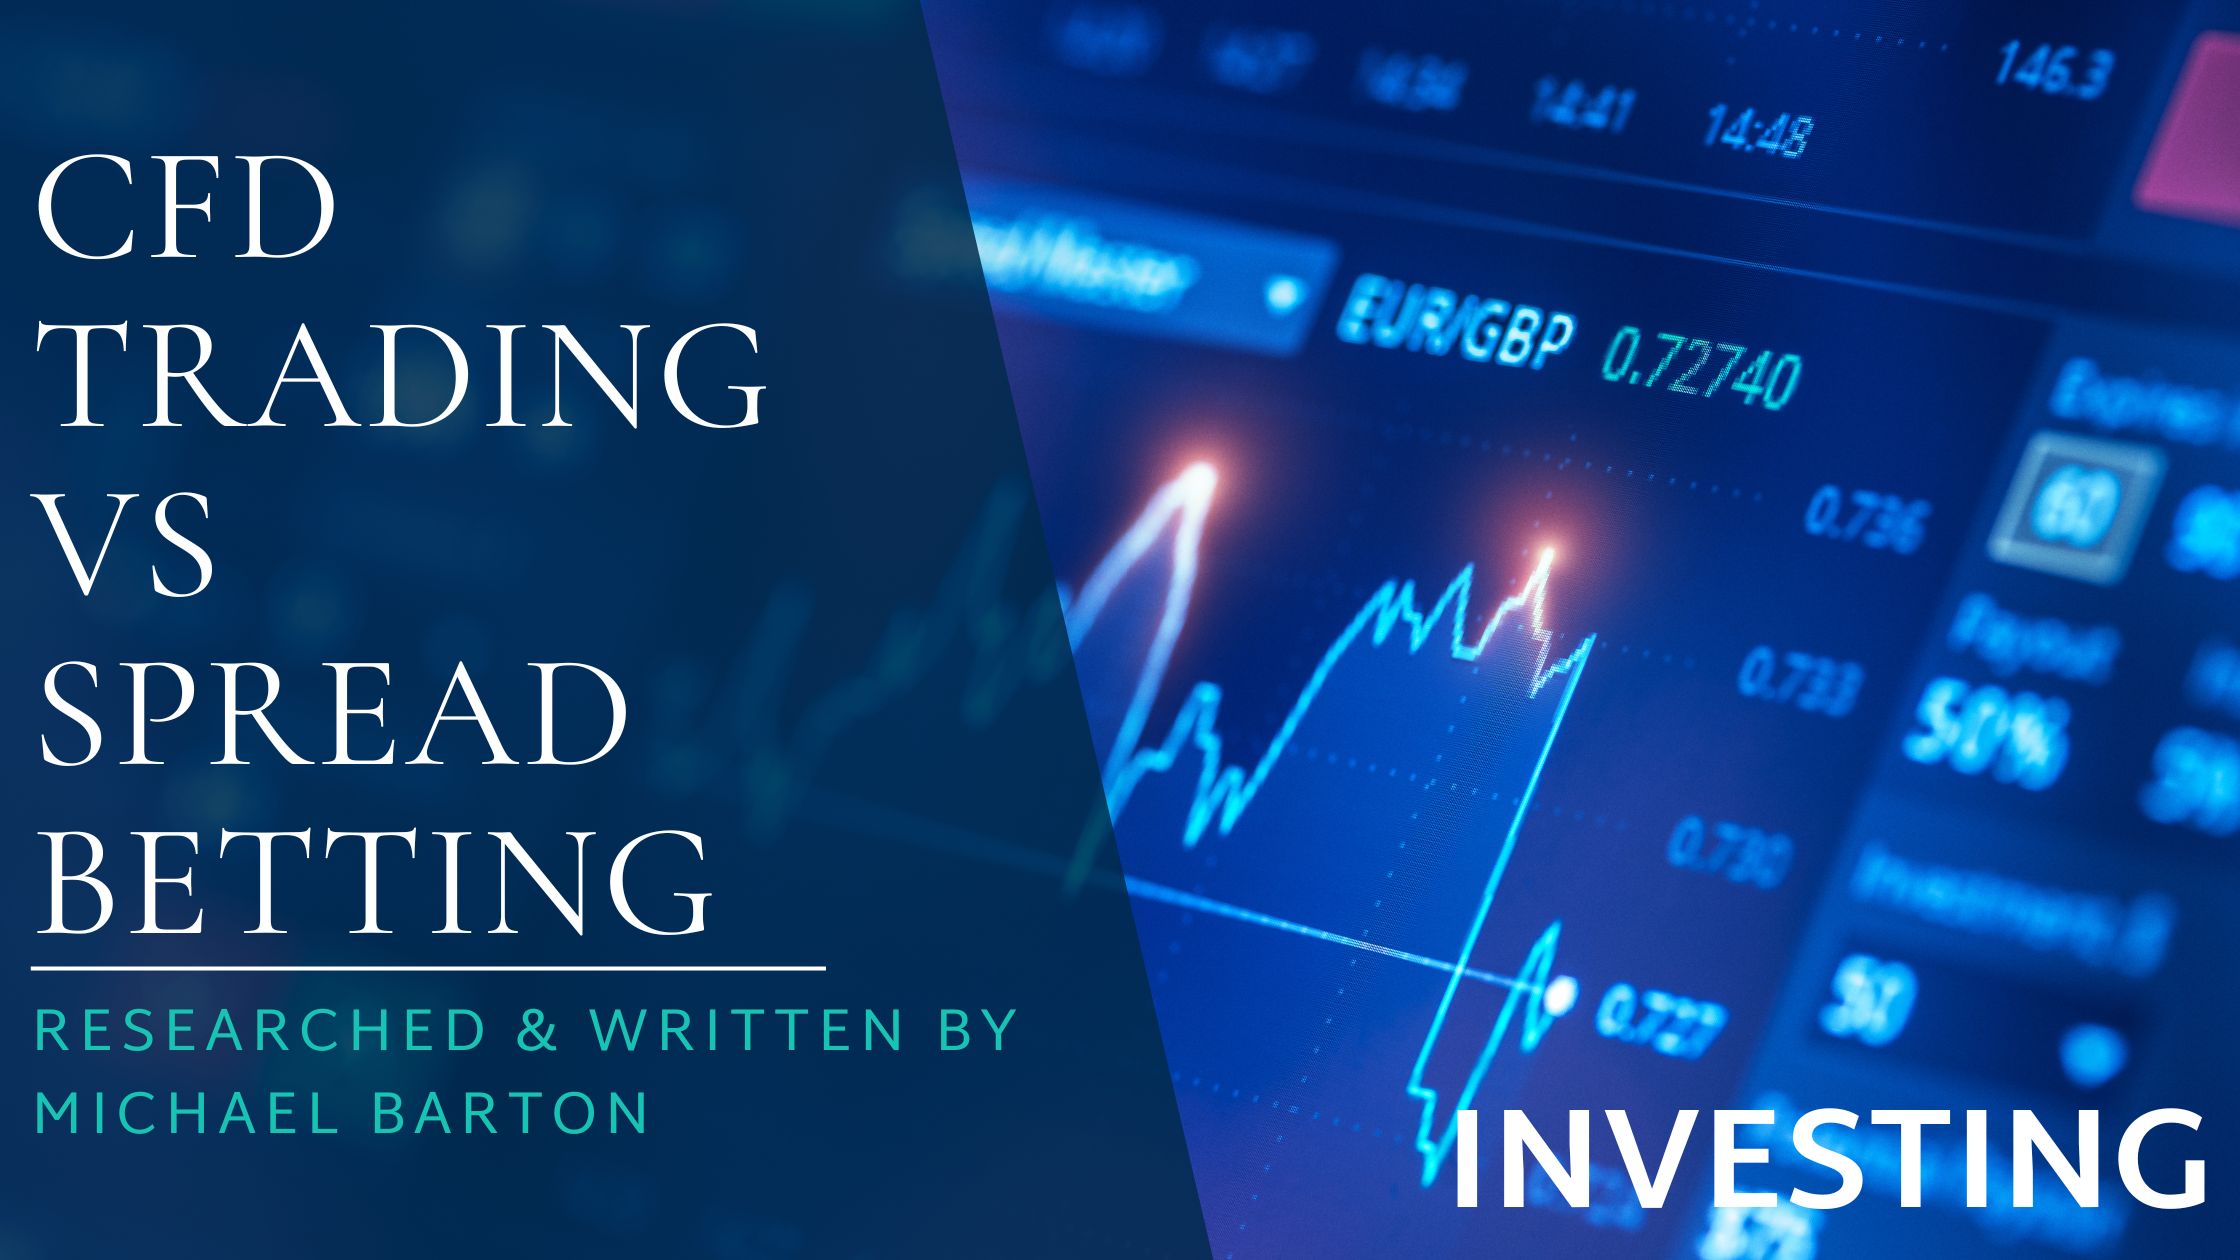 CFD Trading Vs Spread Betting feature image